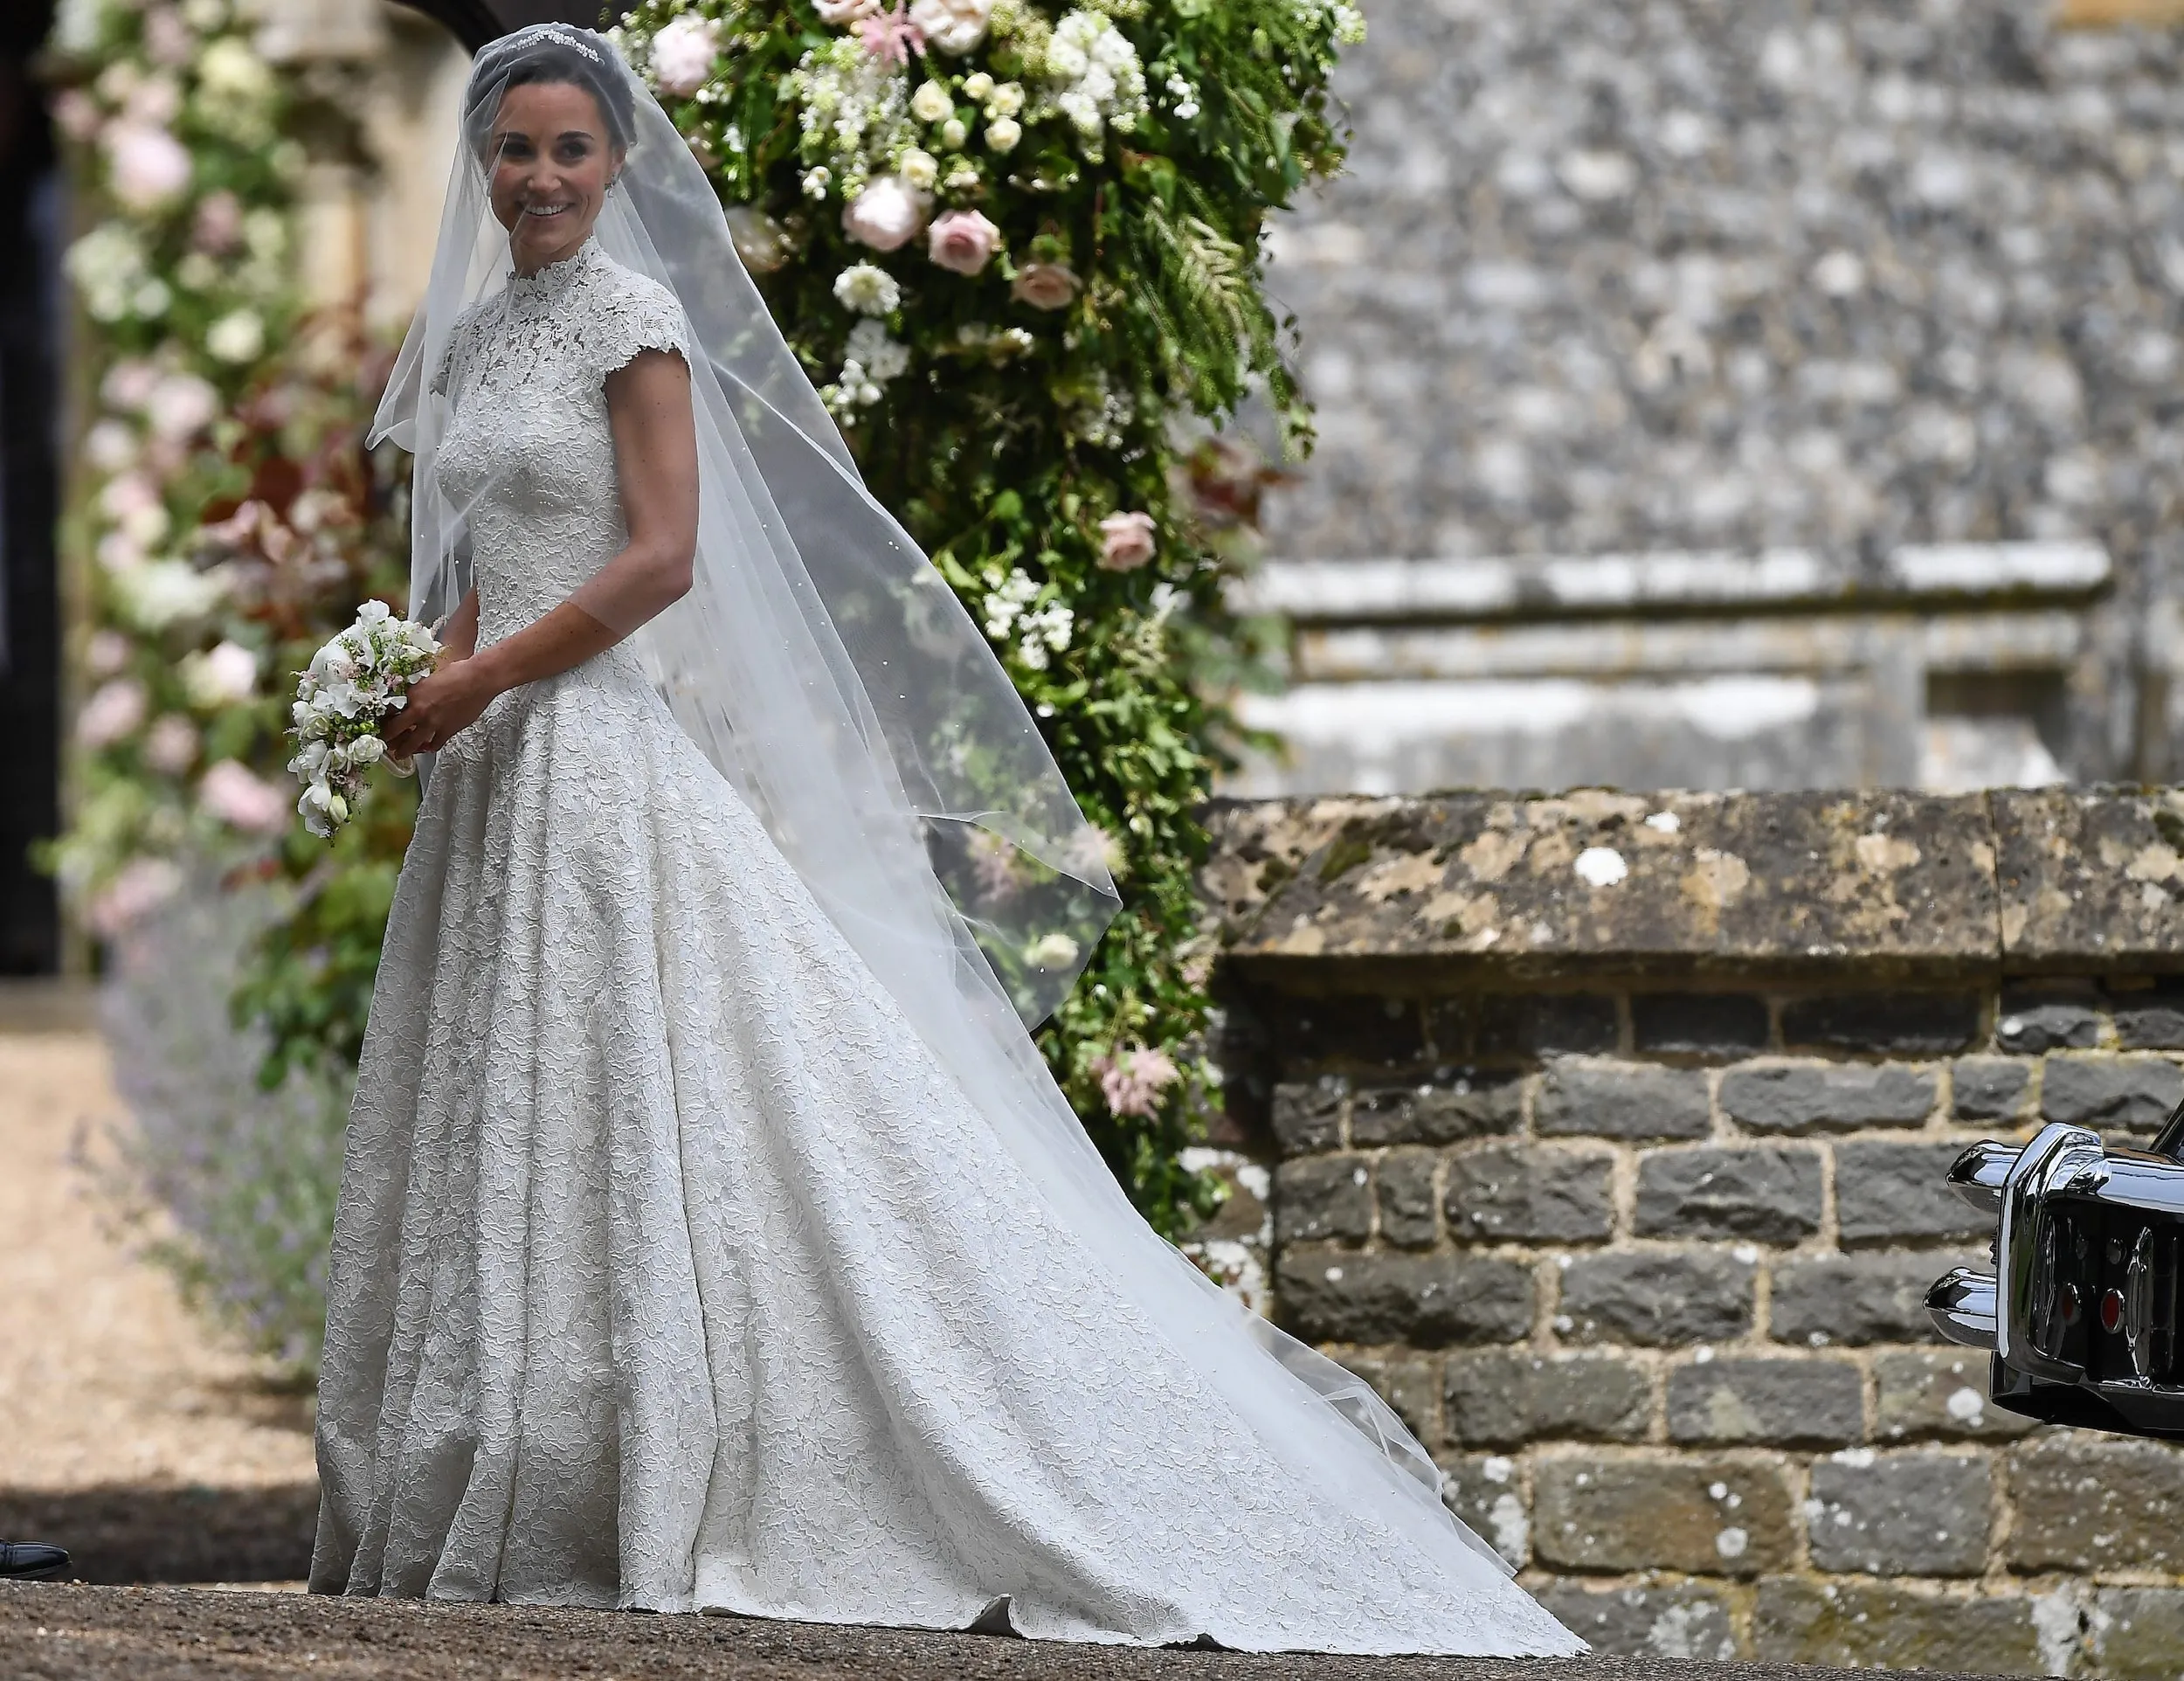 Hidden Details On Pippa Middleton’s Wedding Dress You Didn’t Know About